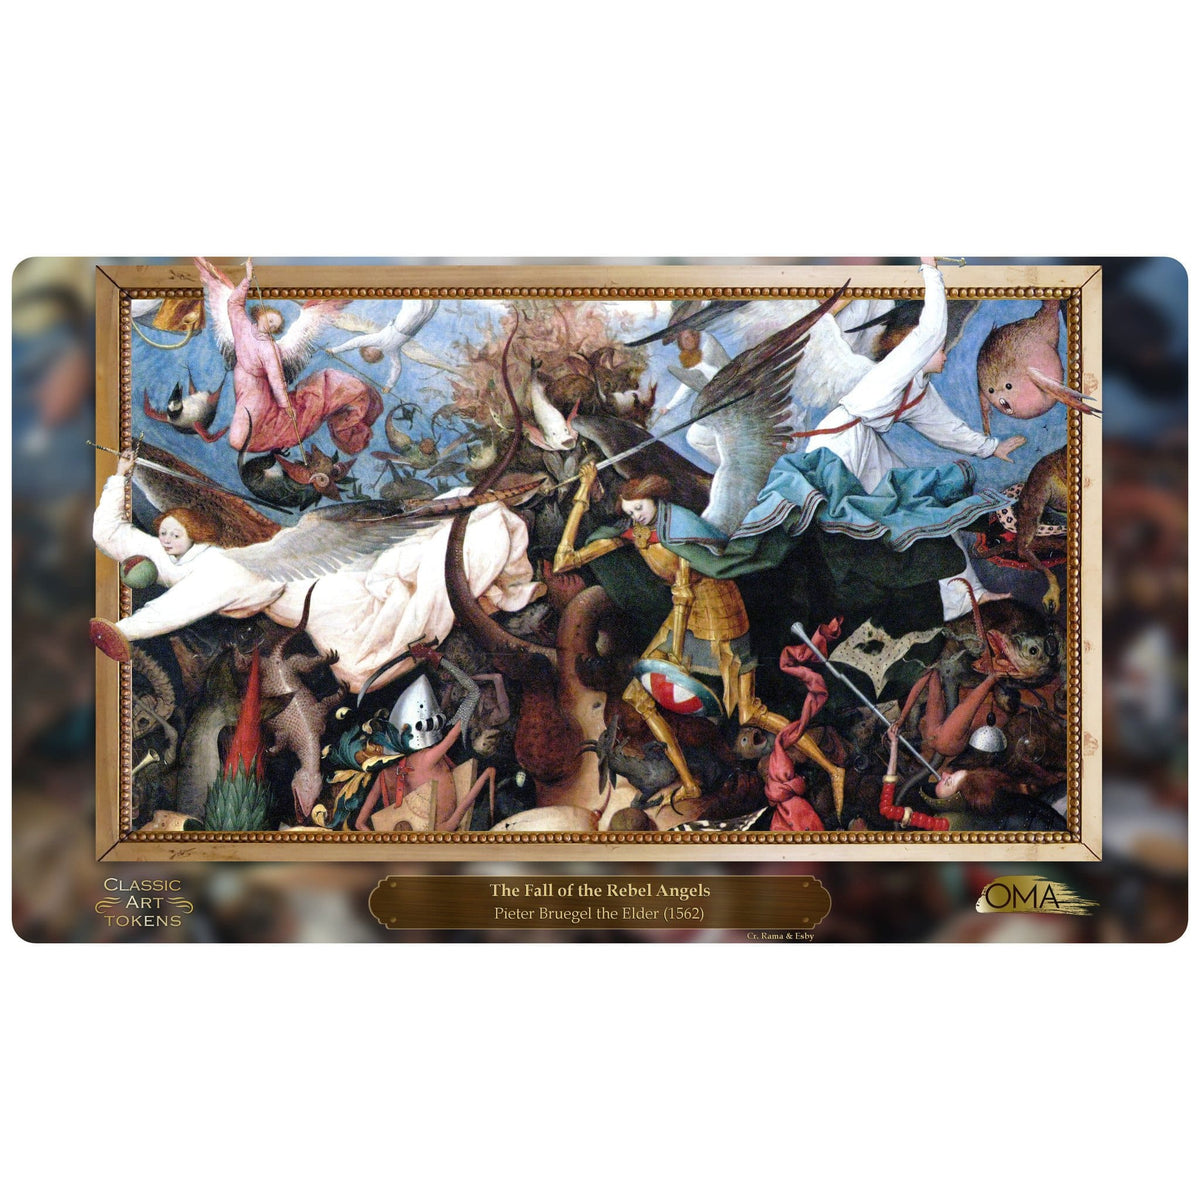 Angel Playmat by Pieter Bruegel the Elder - Playmat - Original Magic Art - Accessories for Magic the Gathering and other card games